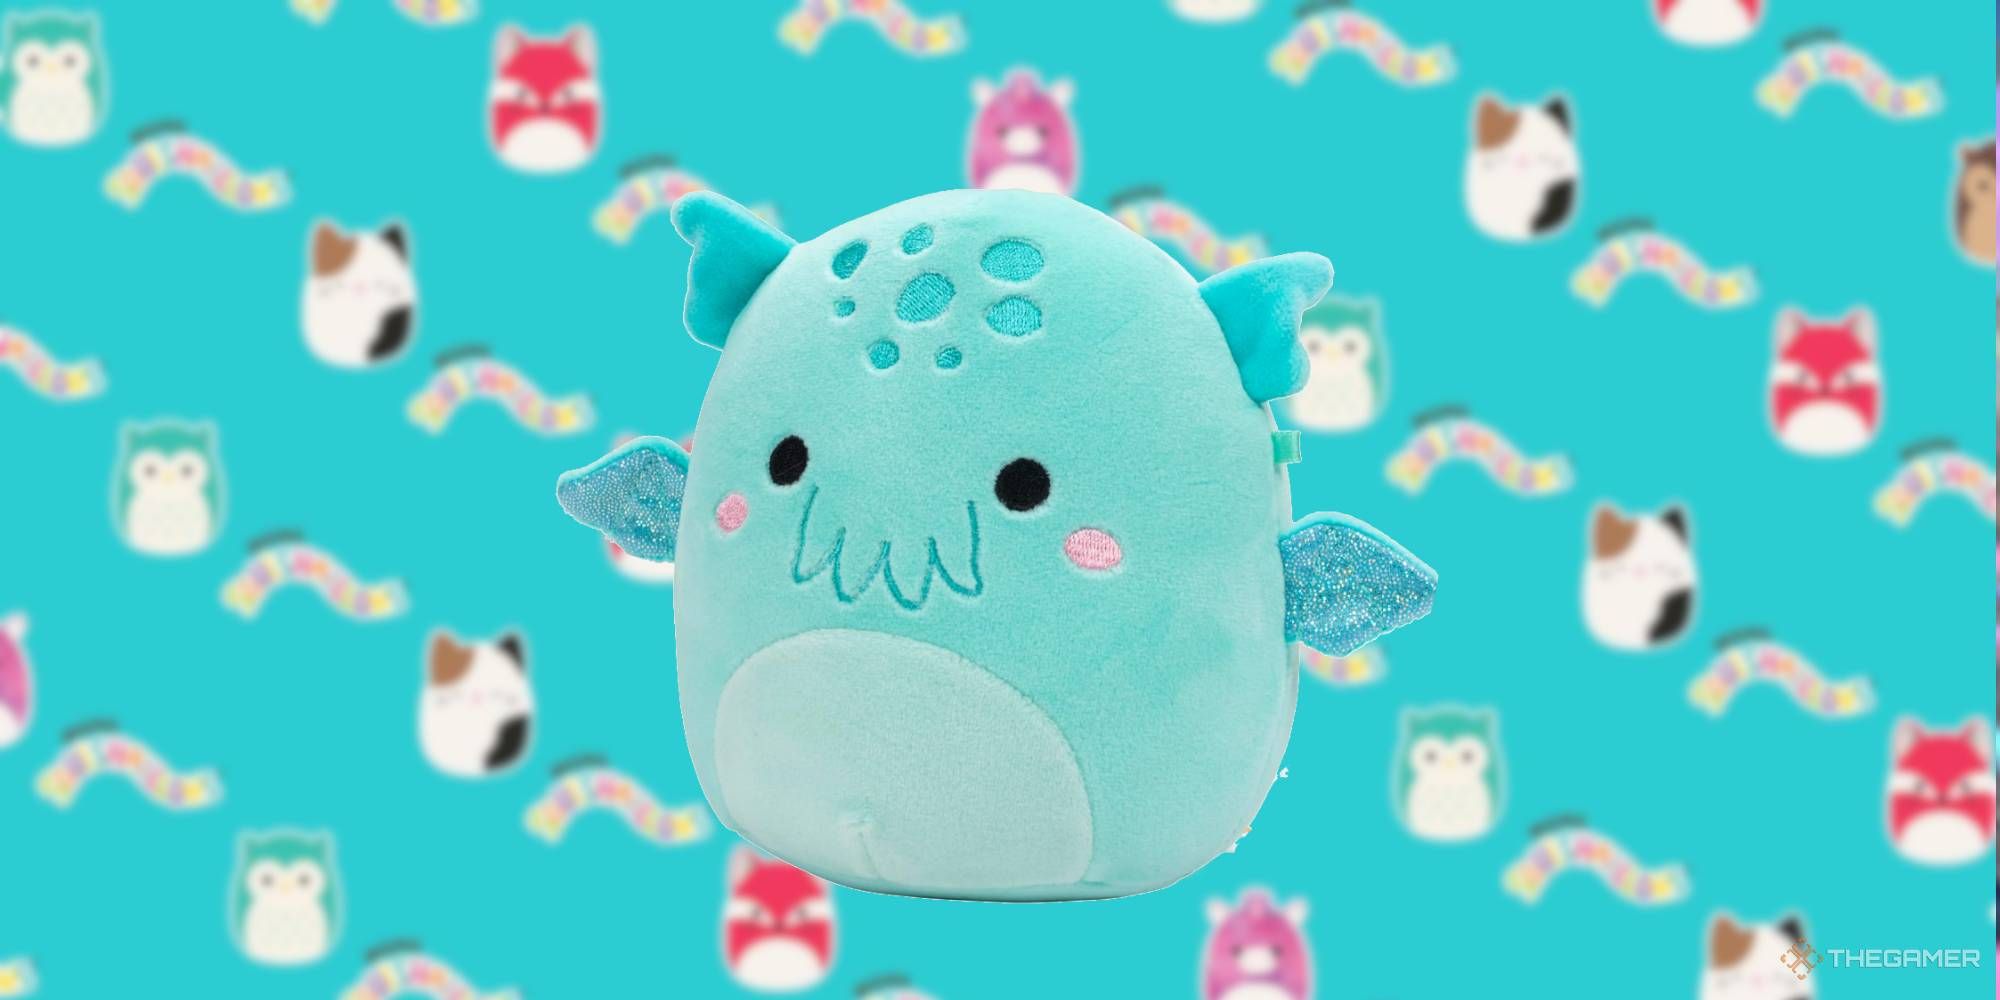 Theotto the Squishmallow superimposed over a background of other plushes